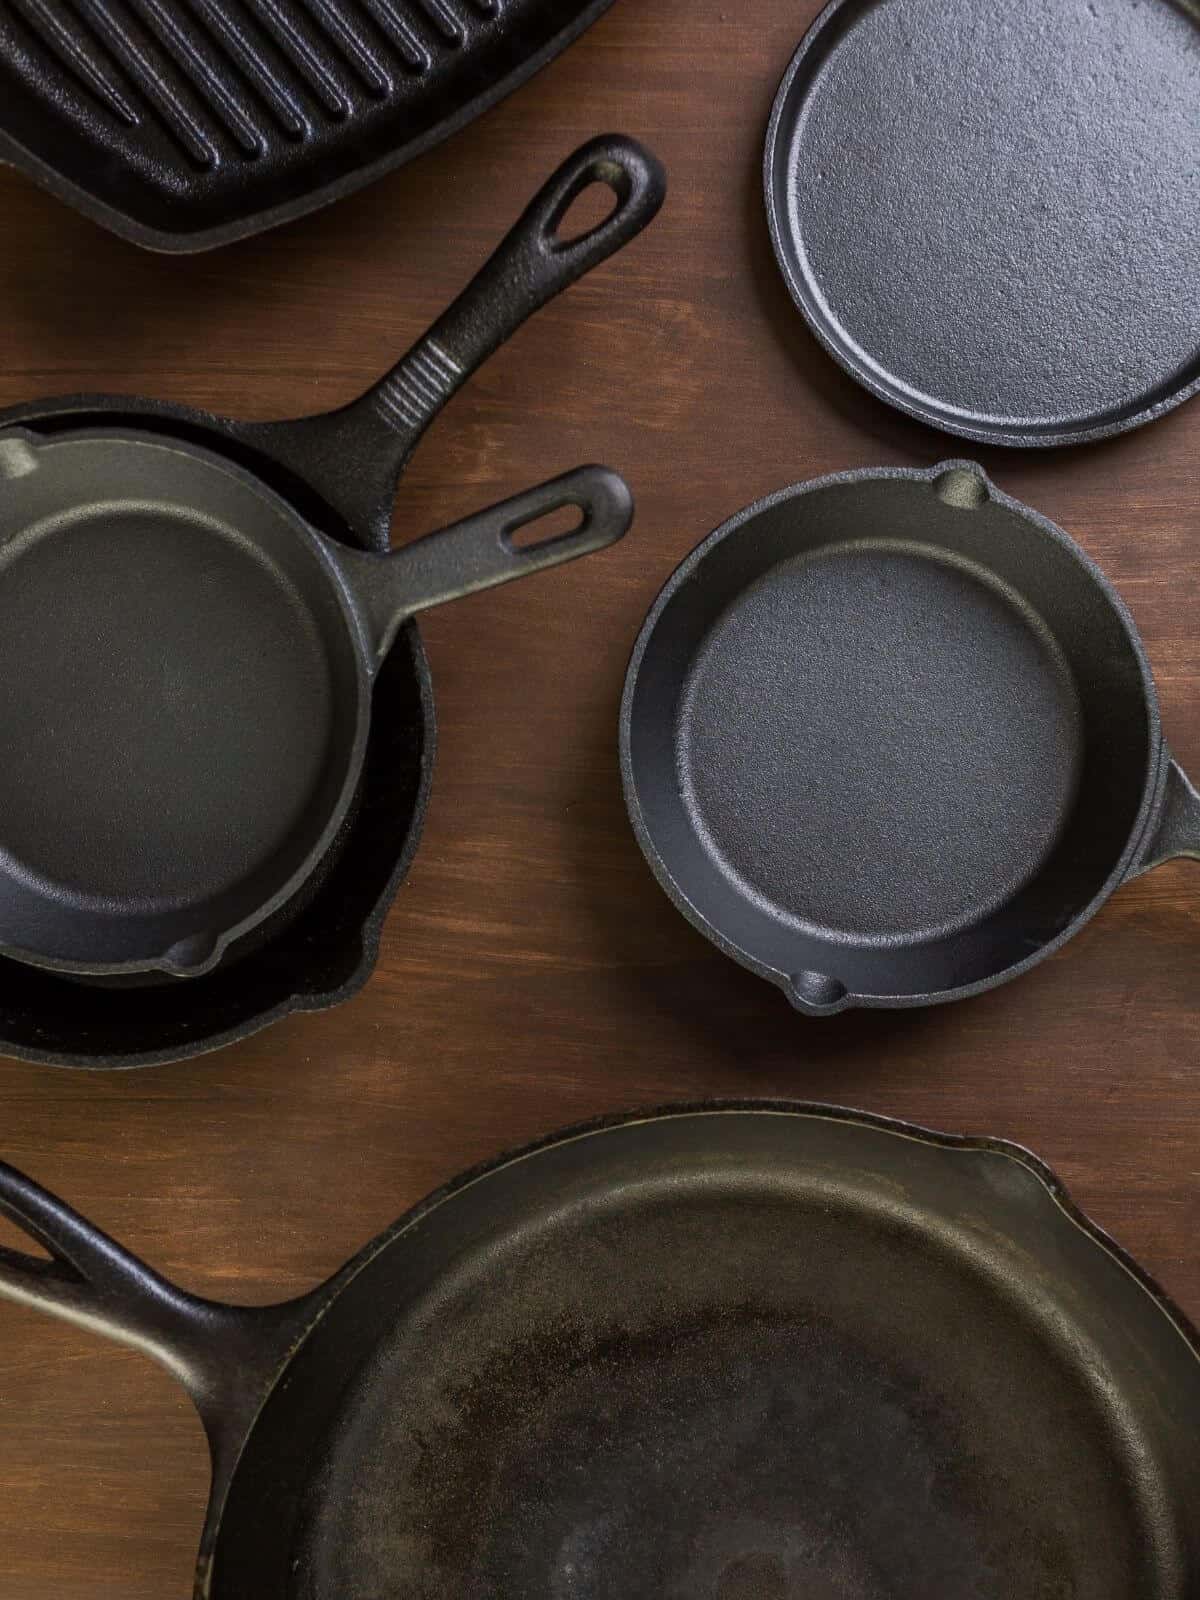 cleaning - Removing burnt olive oil from an enamelled cast iron pan and a  non-stick marble pan? - Seasoned Advice